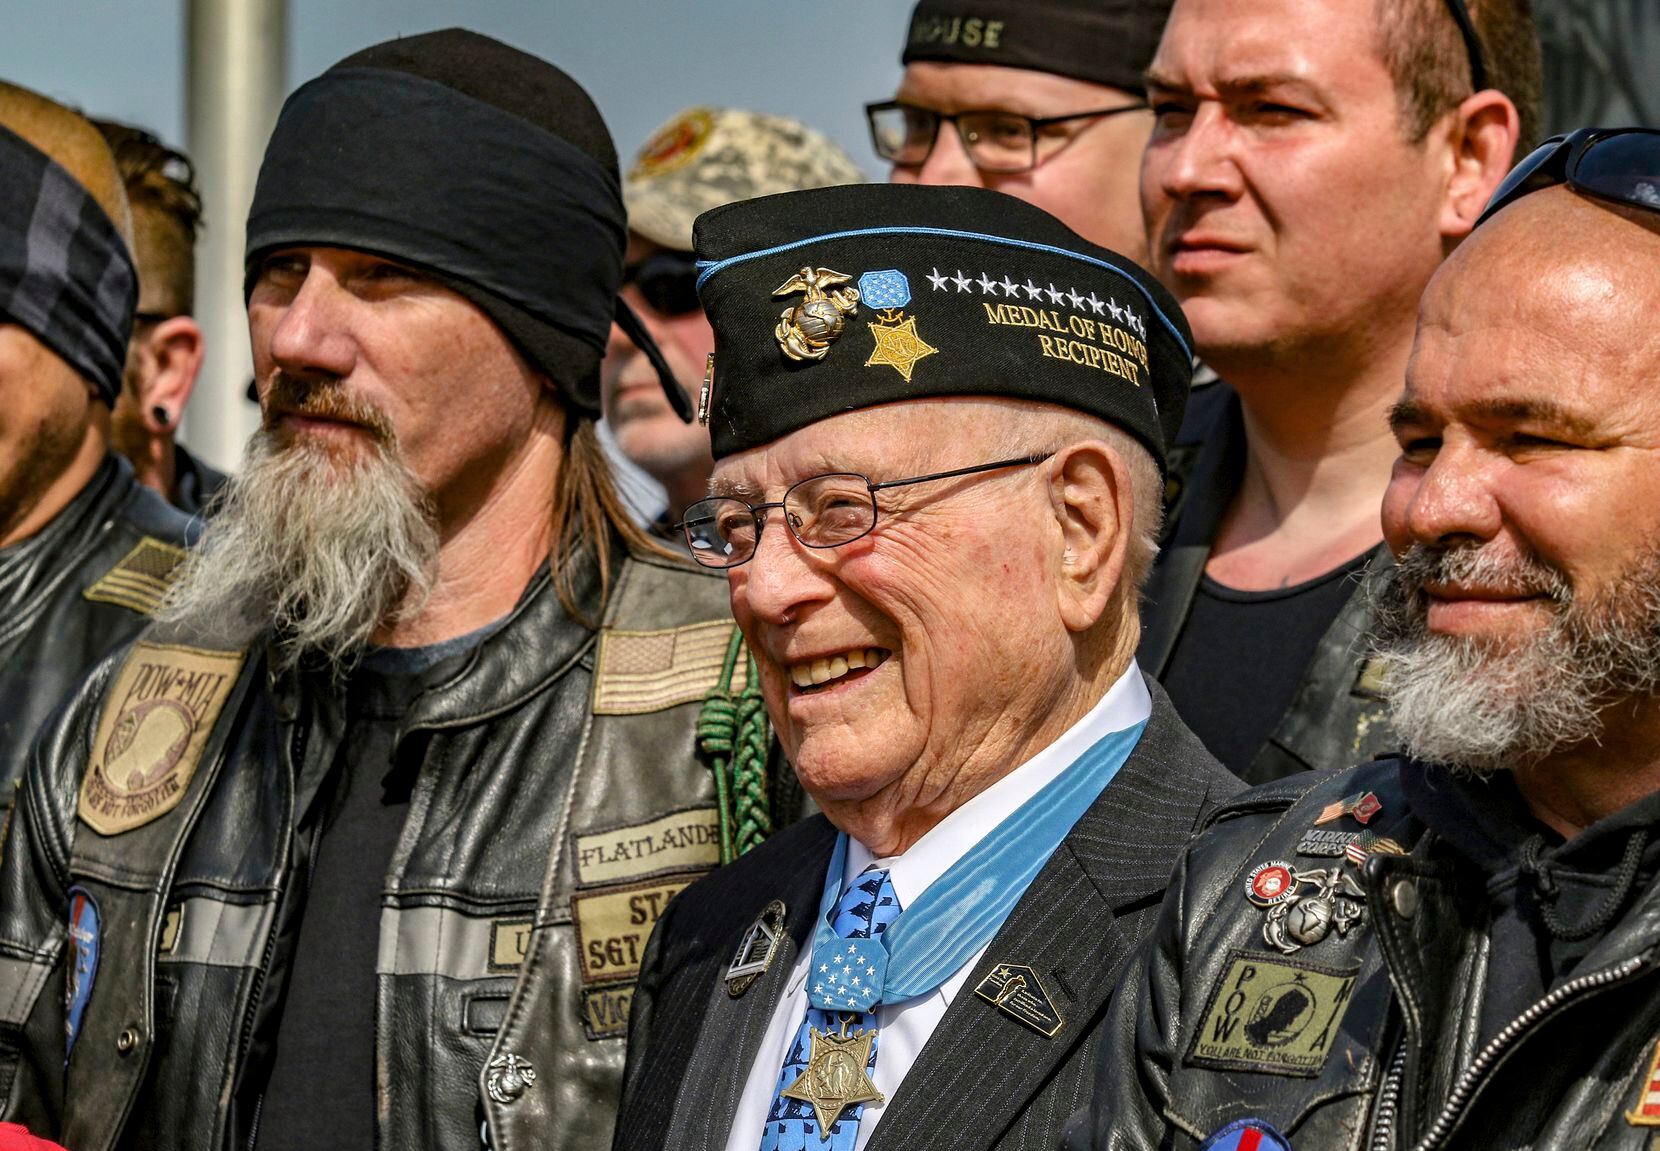 In 2019, Hershel "Woody" Williams (center), who was awarded the Medal of Honor during World...